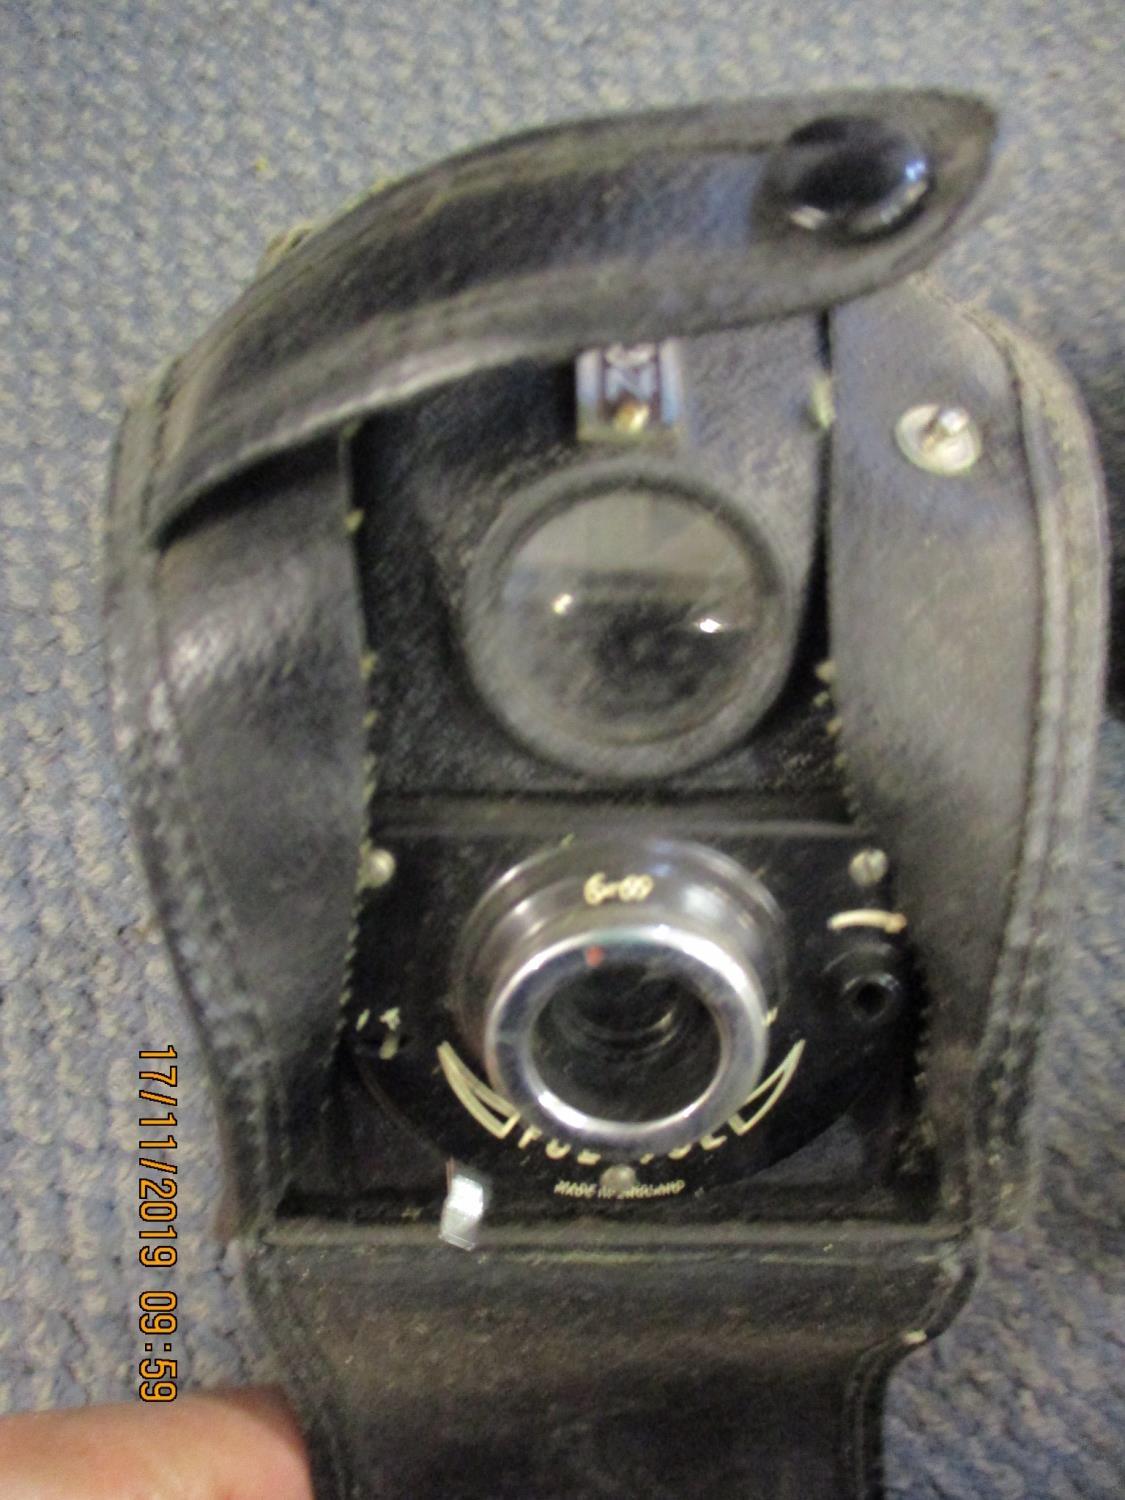 Vintage cameras to include a Rolleicord Compur, a Box Brownie, an Ensign Ful-Vue and a Kodak Brownie - Image 2 of 2